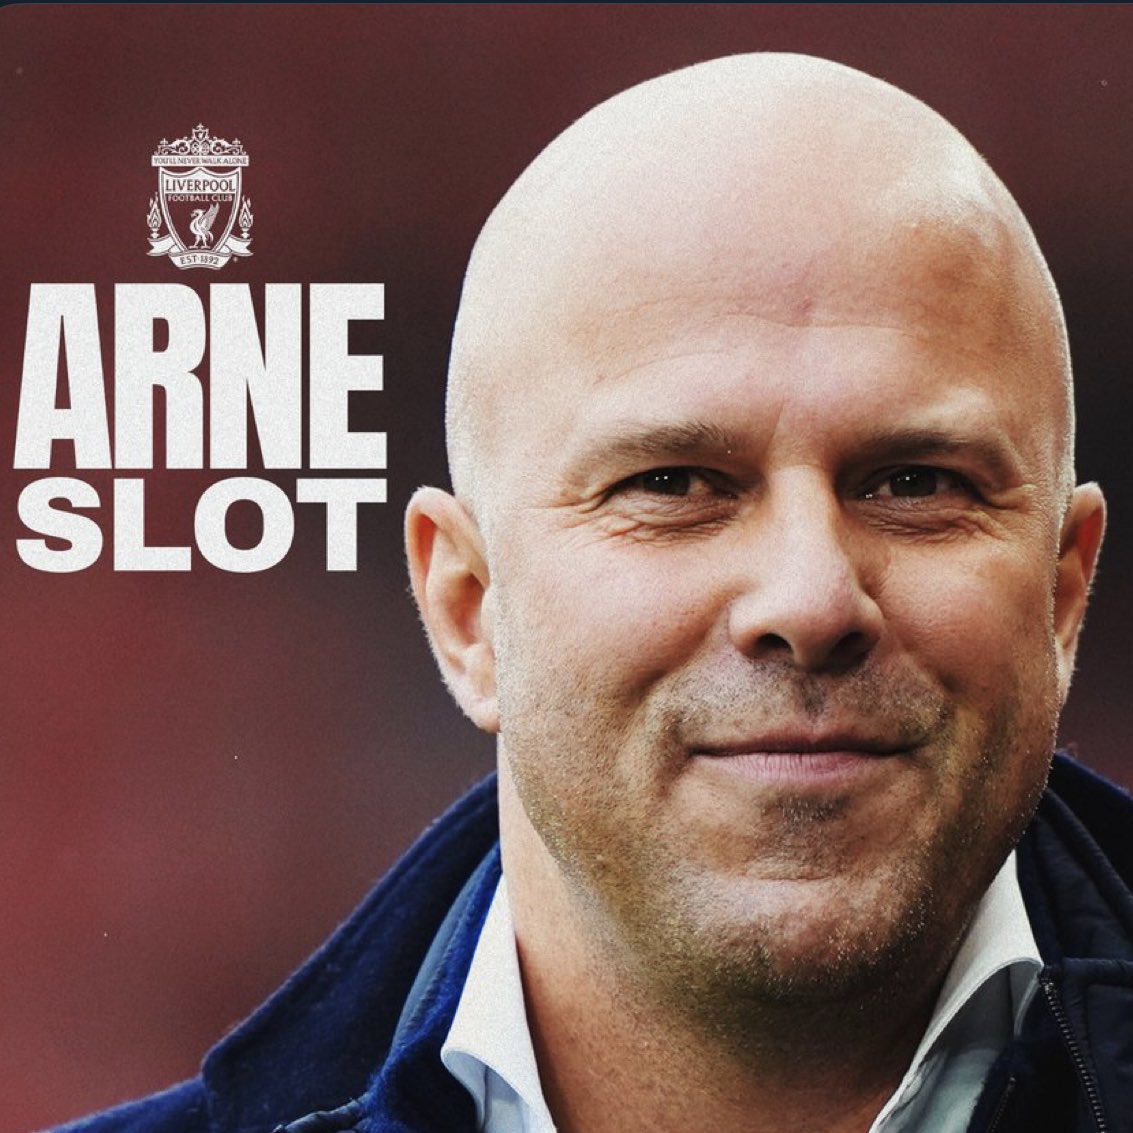 🇳🇱✅ 𝐎𝐅𝐅𝐈𝐂𝐈𝐀𝐋 | Arne Slot is the new Liverpool manager! He will formally take up the role on June 1st. 👨‍🏫 New era for Liverpool begins. ⏳